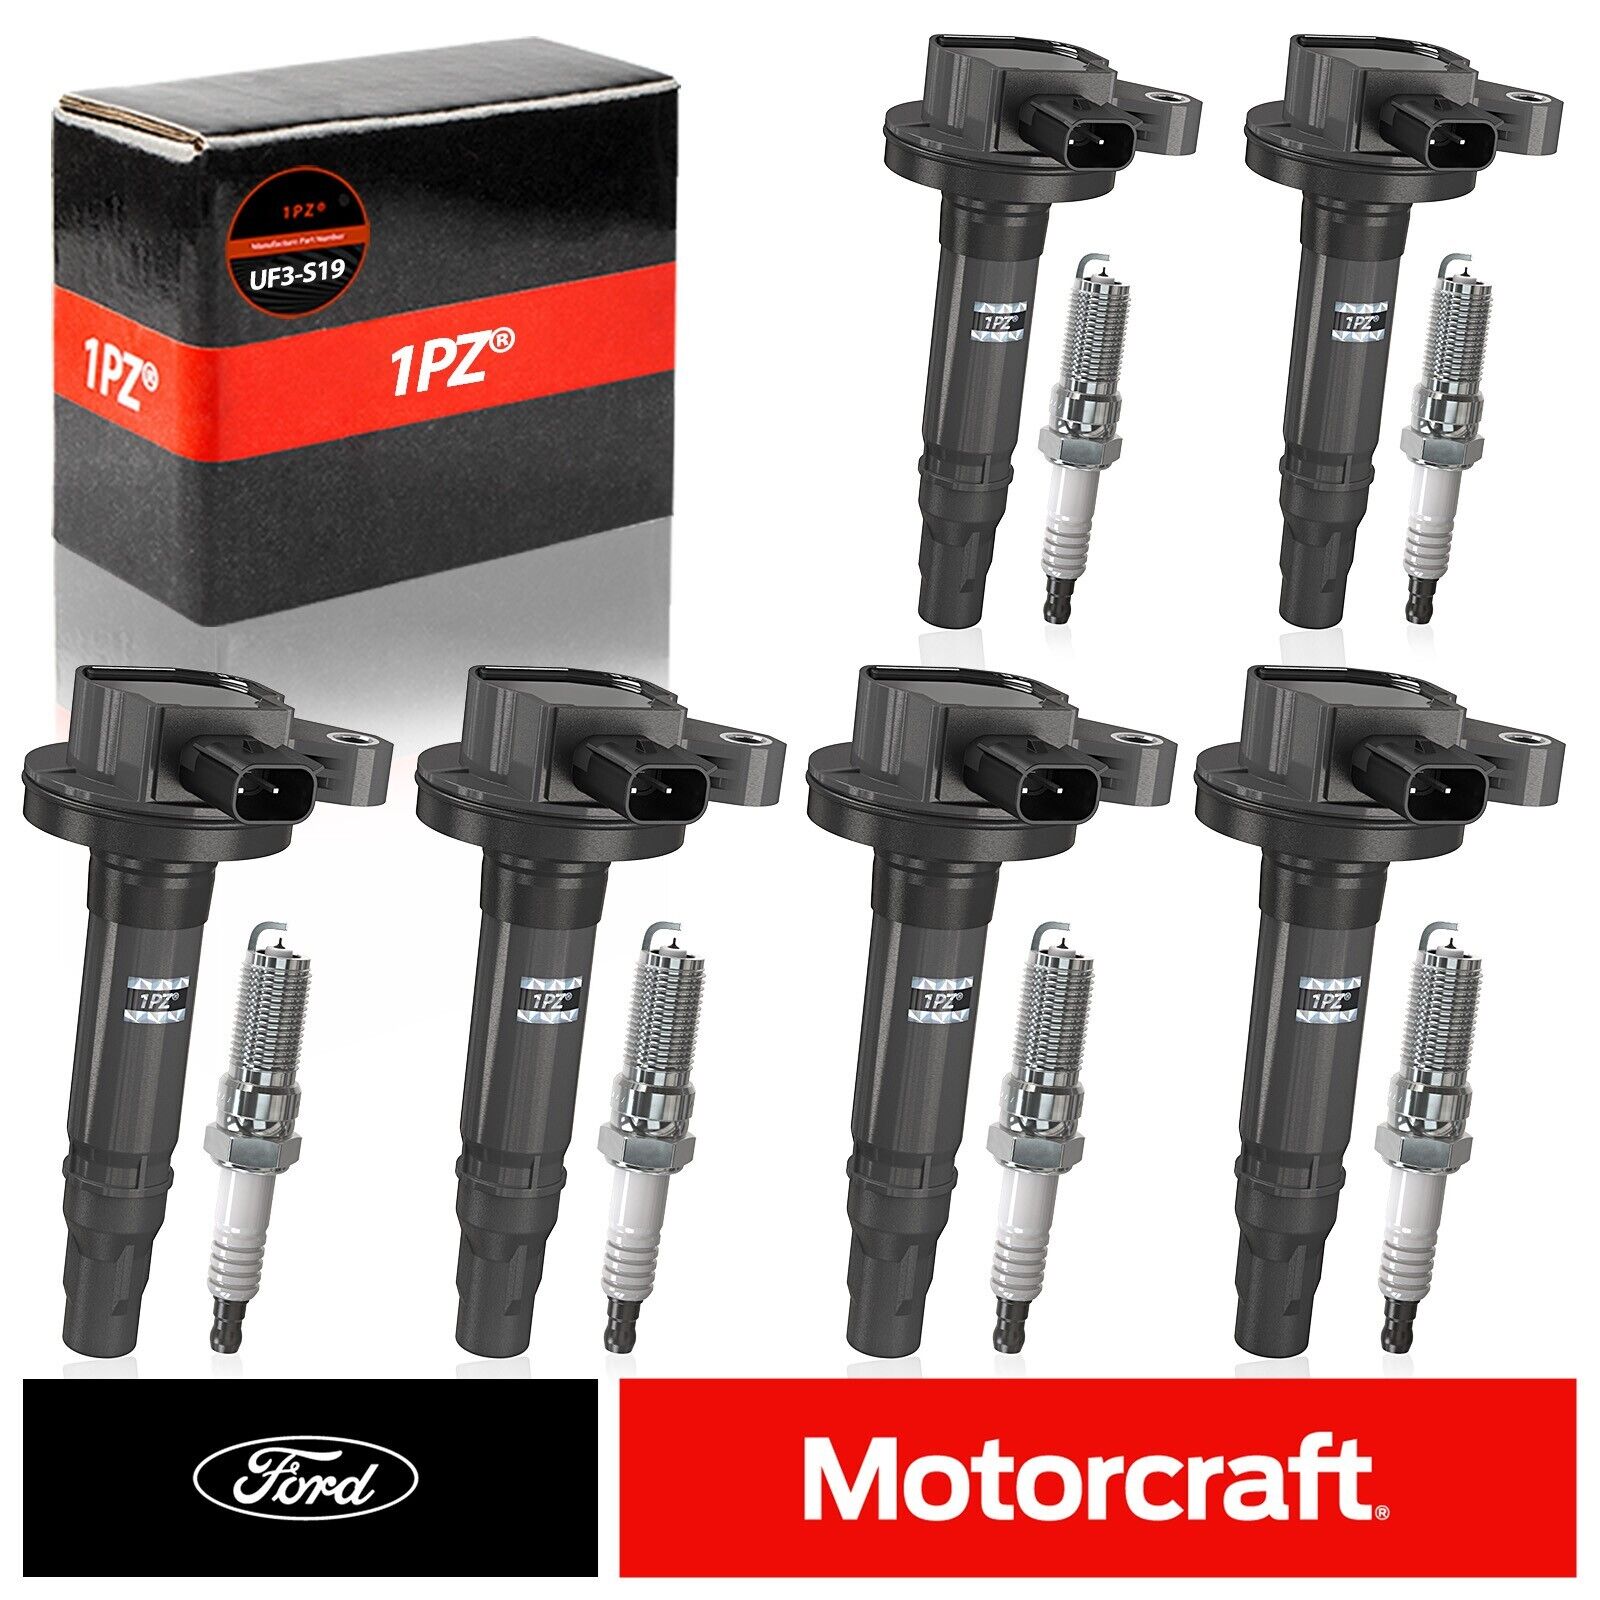 6 x For OEM DG520 Motorcraft Ignition Coils Ford 07-13 Lincoln Mercury 3.5L 3.7L